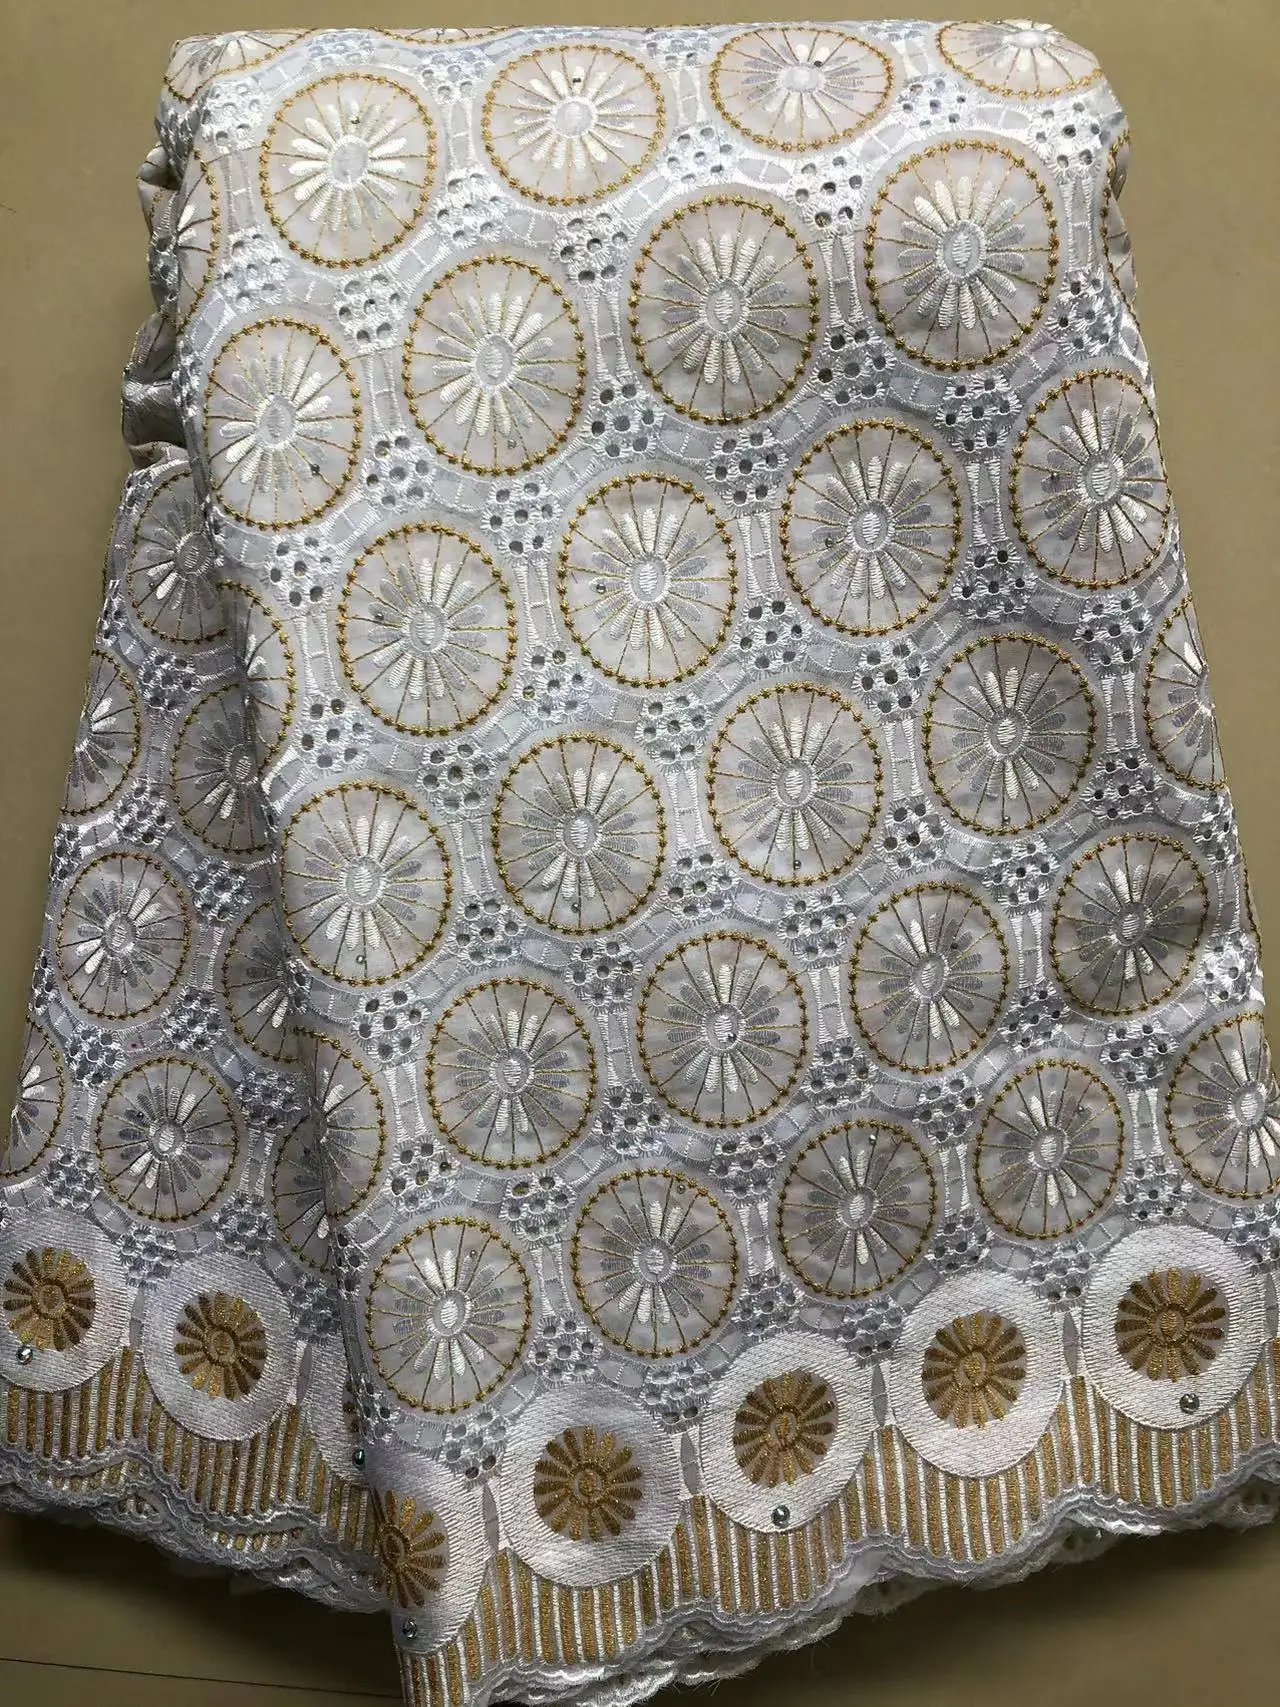 African Cotton Lace Fabric 2023 High Quality Swiss Voile Lace In Switzerland With Stones Nigerian Lace Fabrics For Wedding Dress pgc 2021 african lace fabric cotton swiss voile lace in switzerland nigerian swiss lace fabric for wedding dress sew ya4327b 1